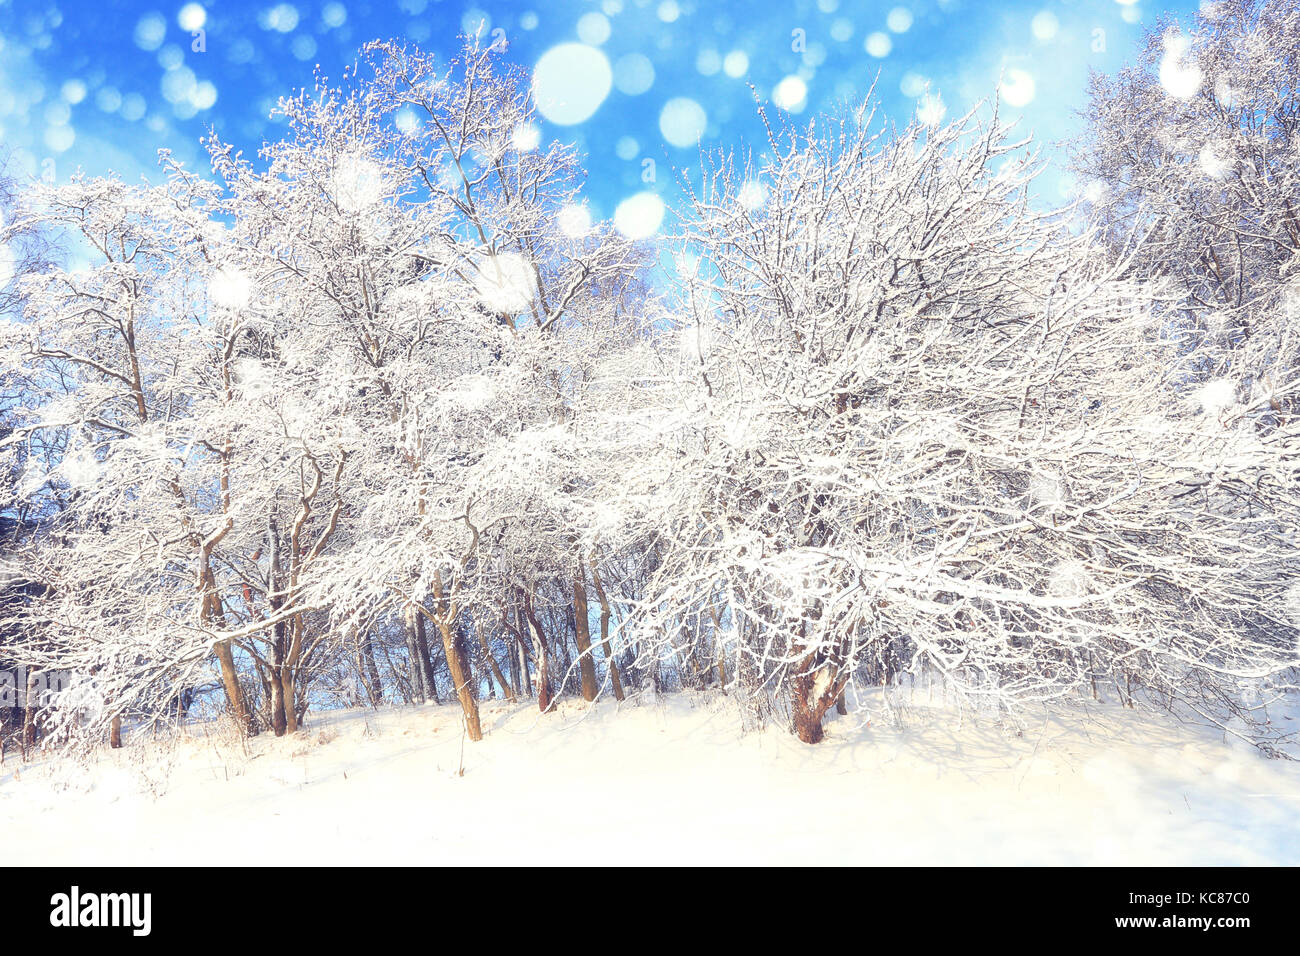 Sunny christmas day in central park. White fluffy snow on trees in park. Snowy xmas theme. Stock Photo